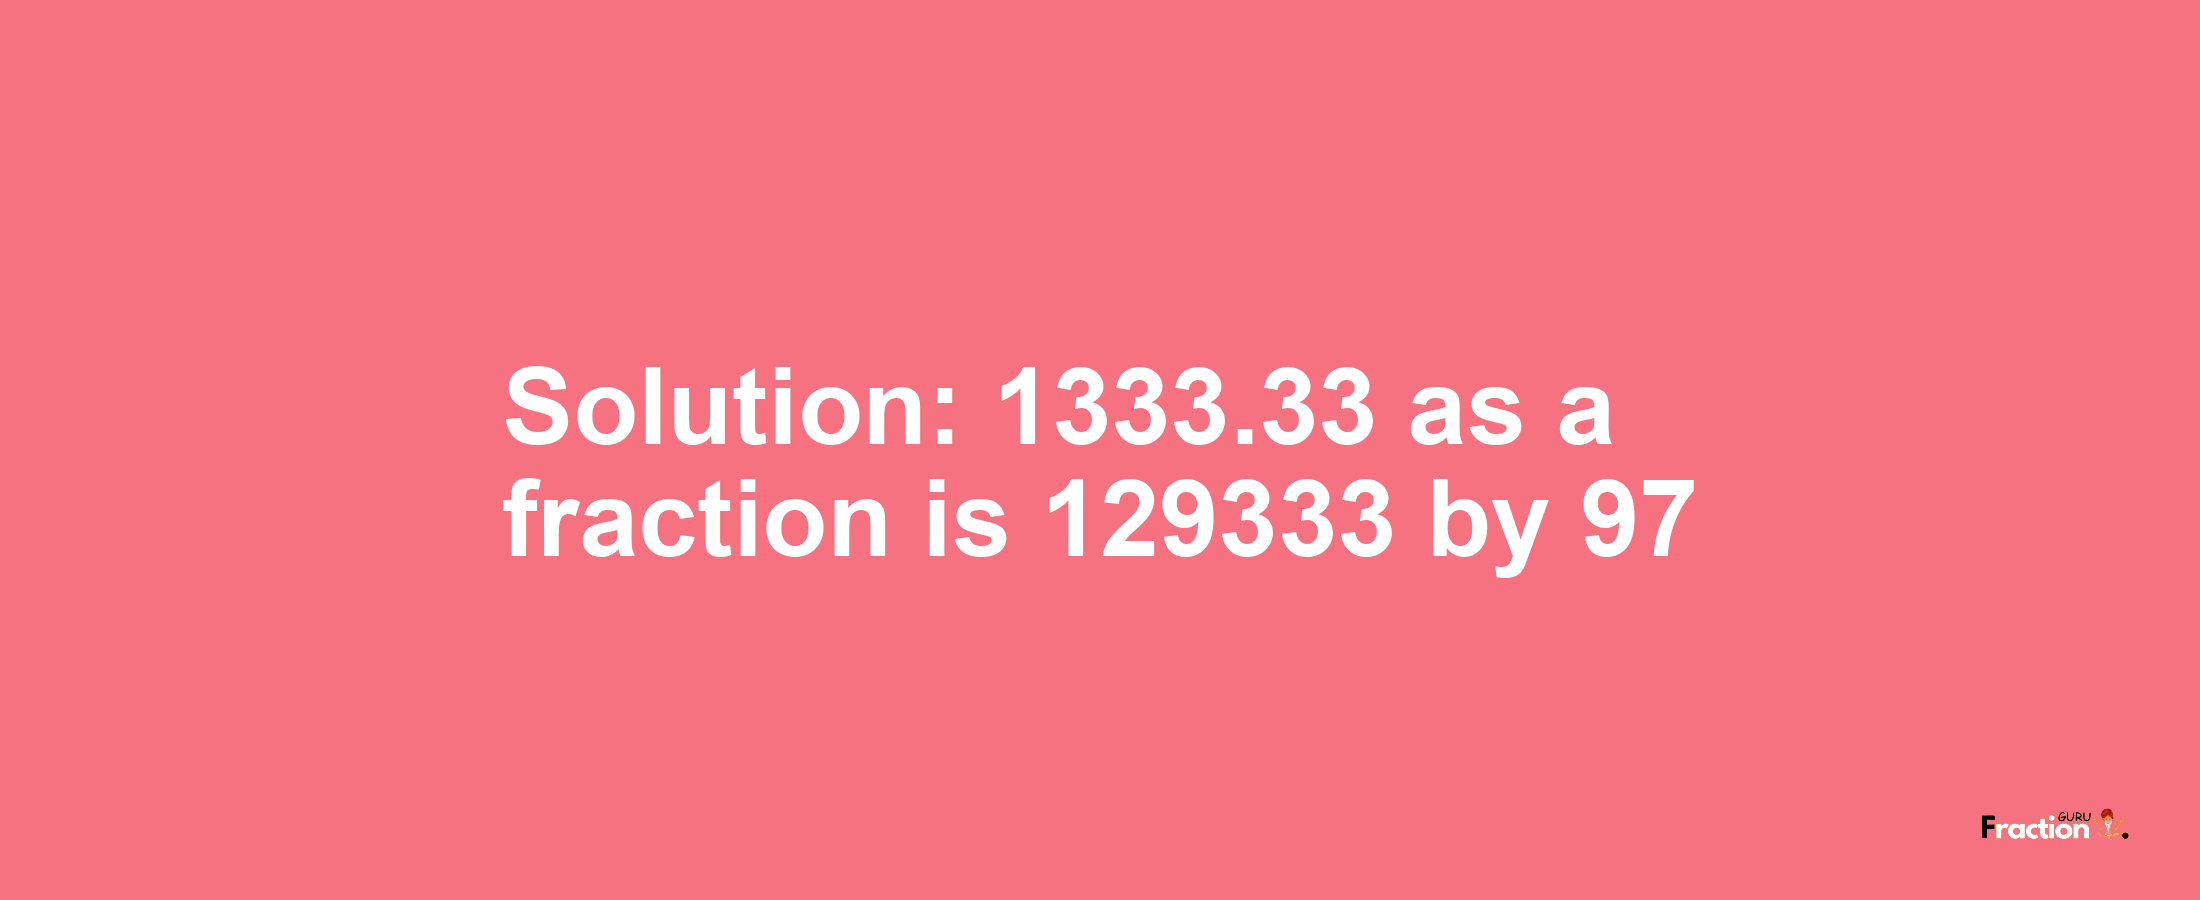 Solution:1333.33 as a fraction is 129333/97